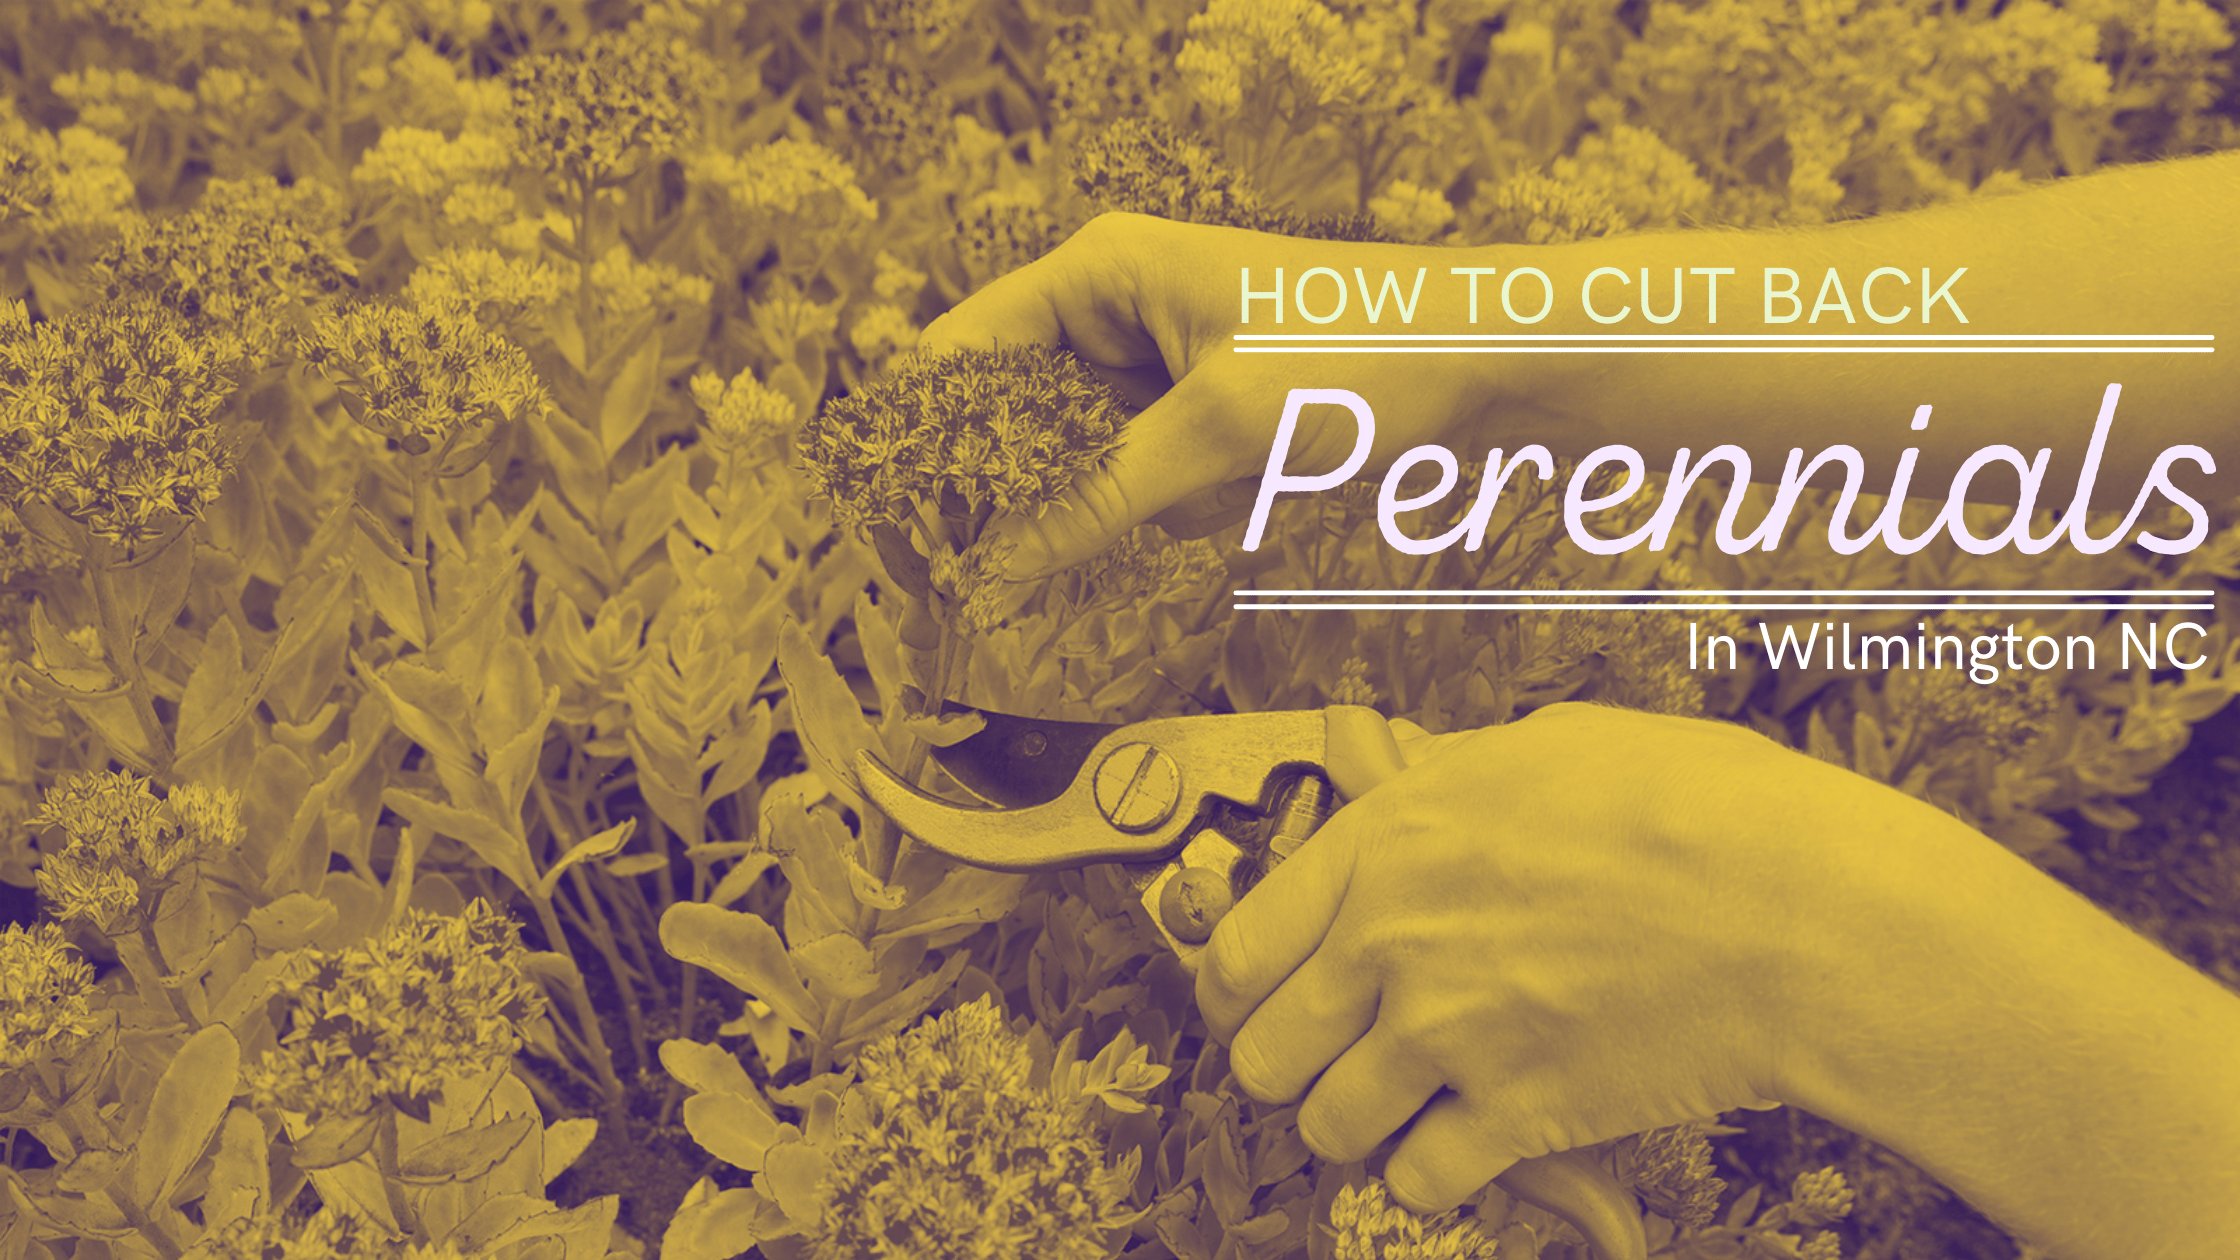 How to Cut Back Perennials in Wilmington NC